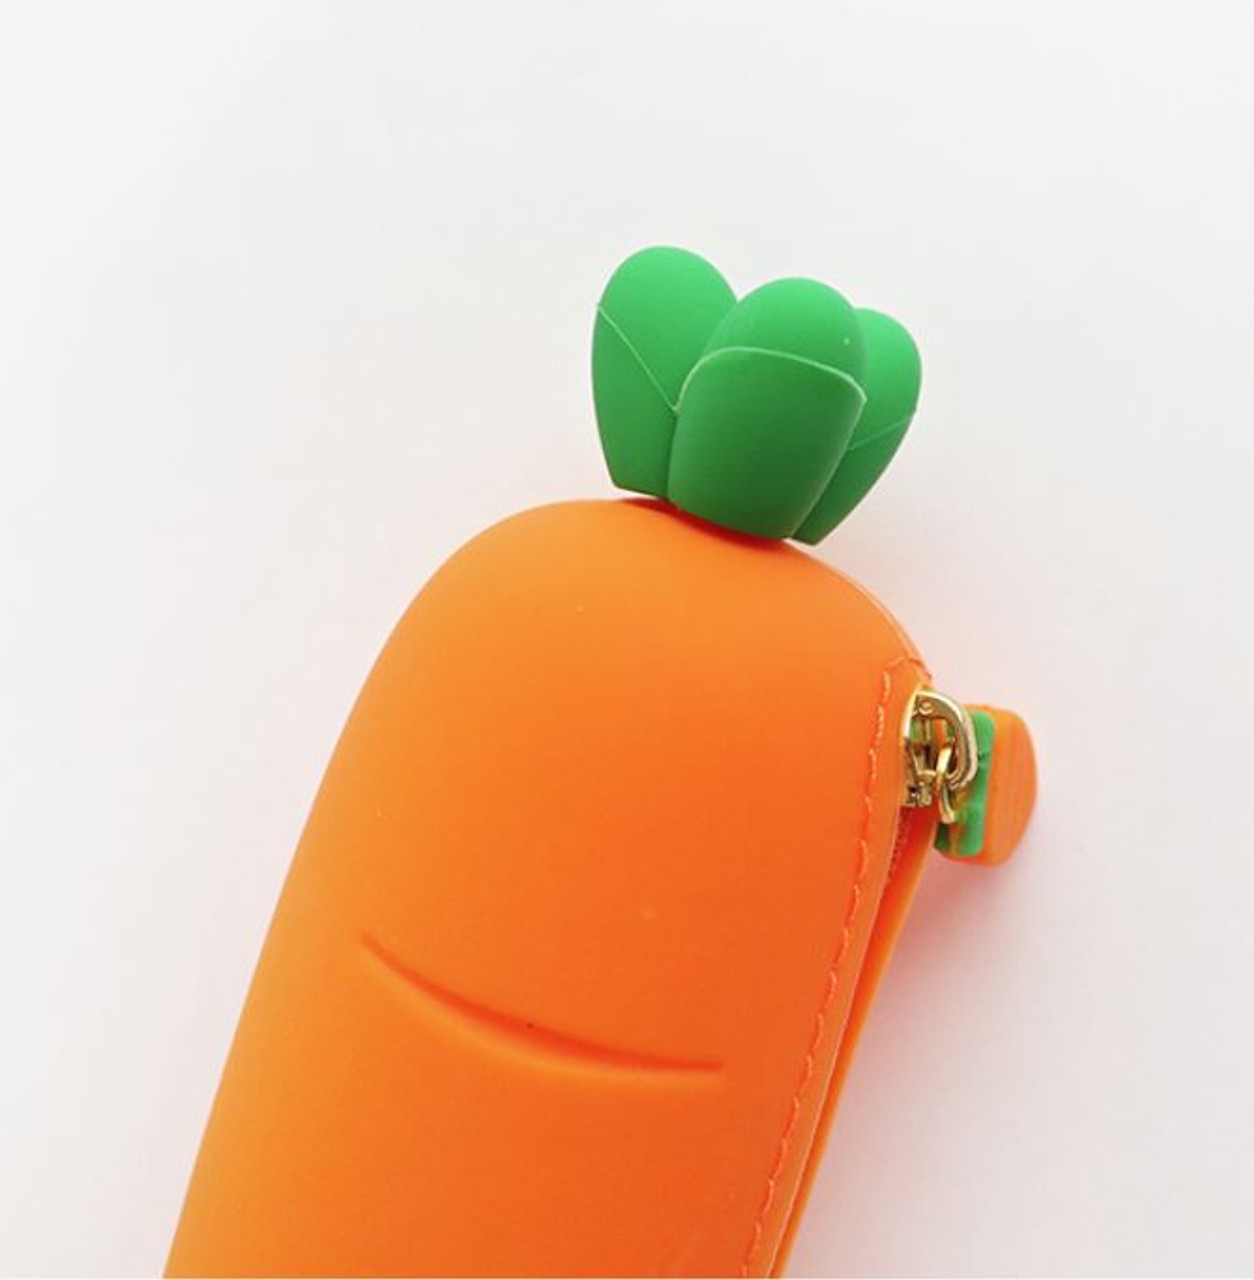 Vorra Fashion Carrot Vegetables and Fruits Shape Silicone Pencil  Bag Vegetables and Fruits Shape Carrot, Carrot Makeup bag, carrot pencil  case, pencil pouch, pen pouch, wallet Art Polyester Pencil Box 